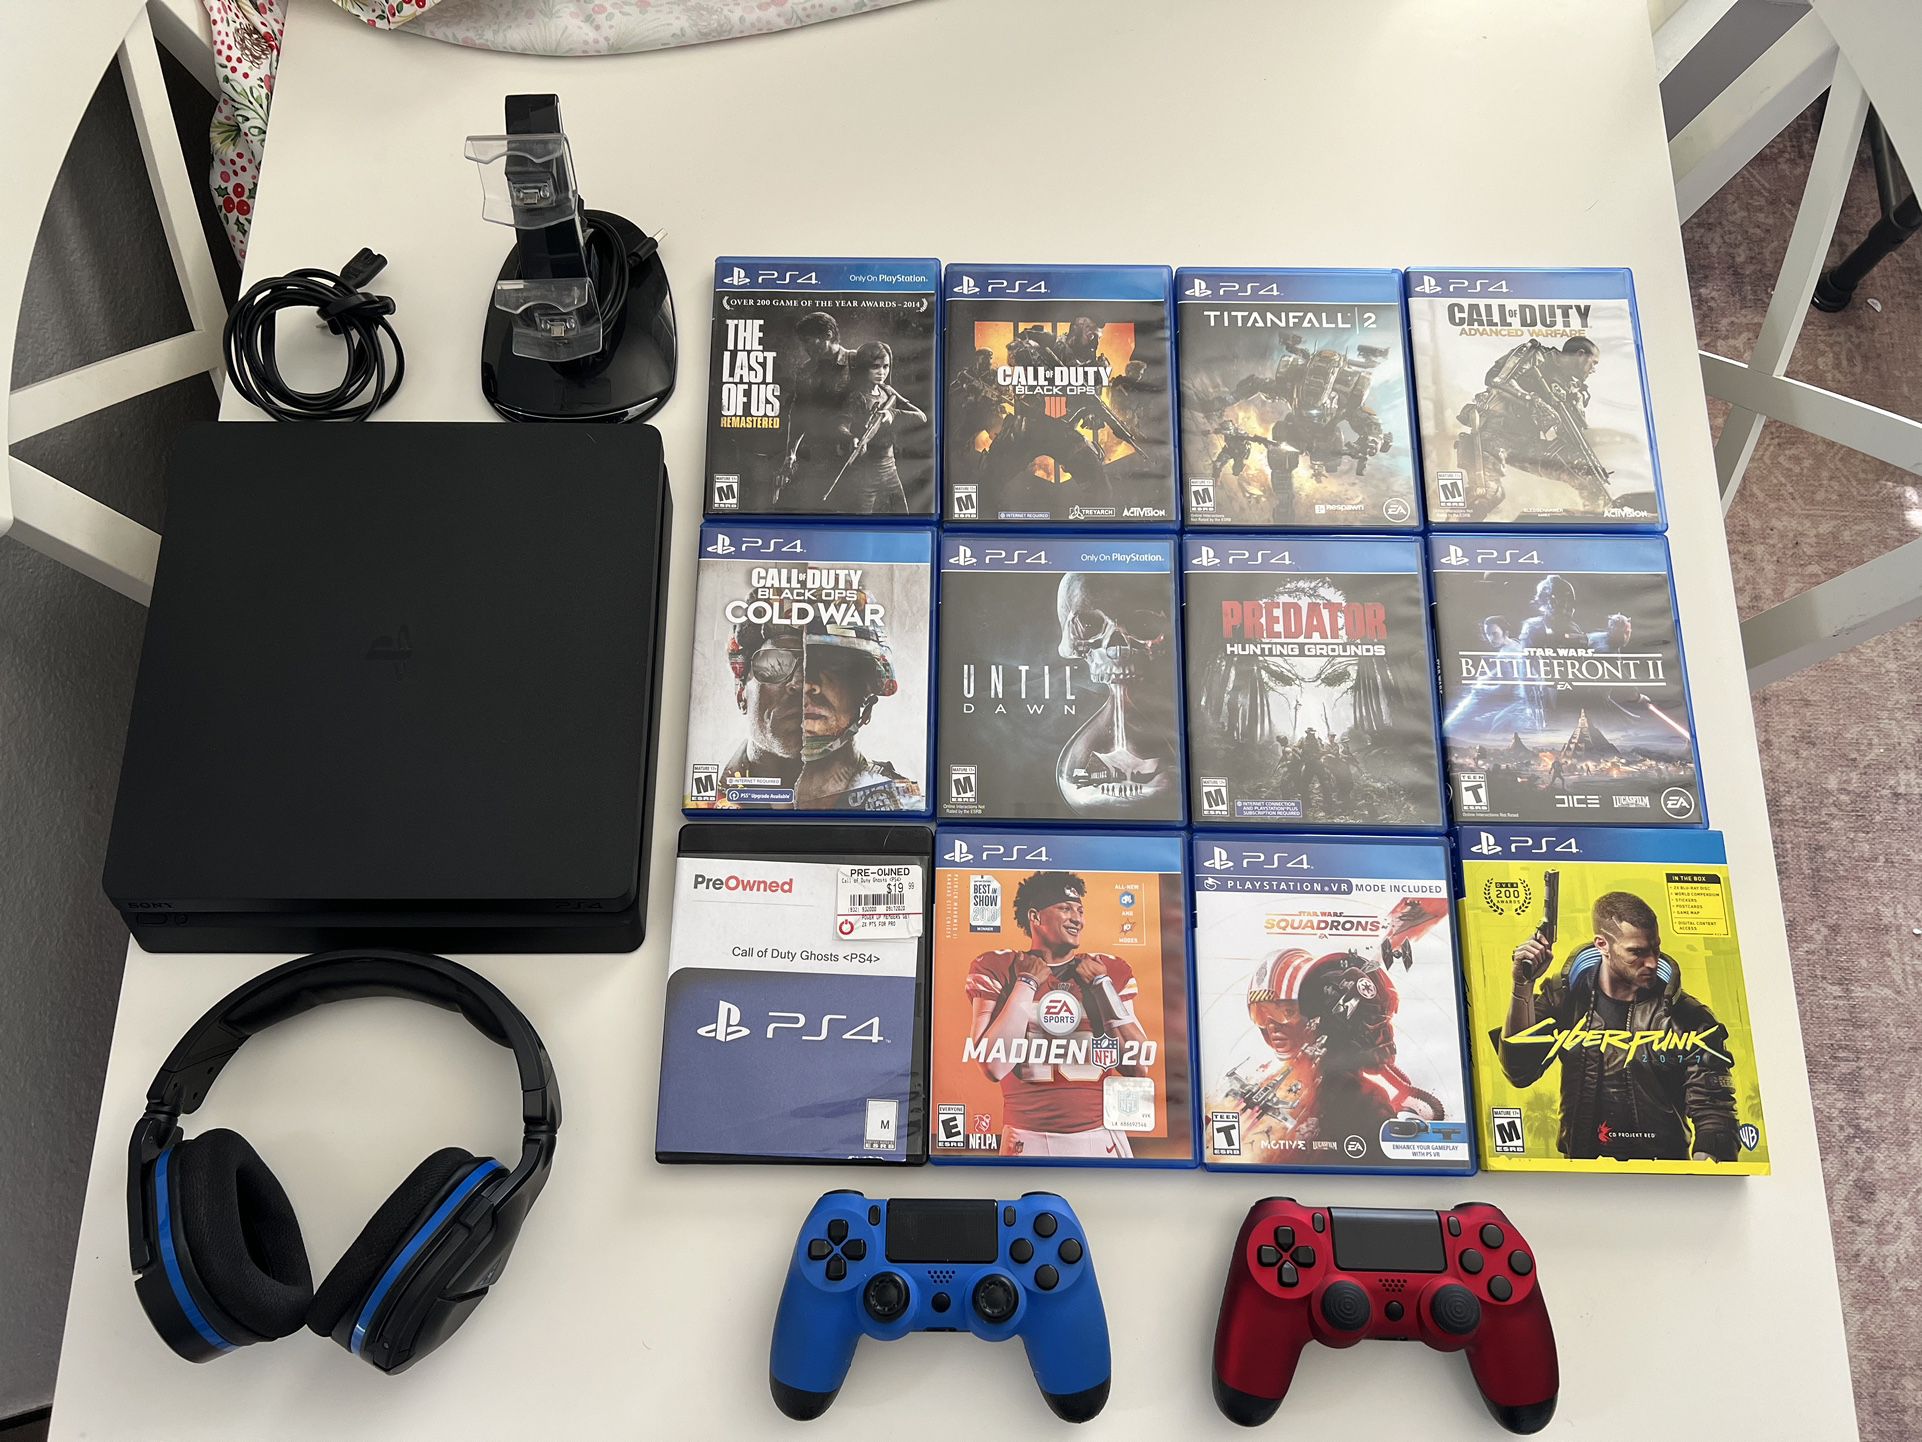 PlayStation 4 Slim, With 2 Controllers, Wireless Headset, and Games!